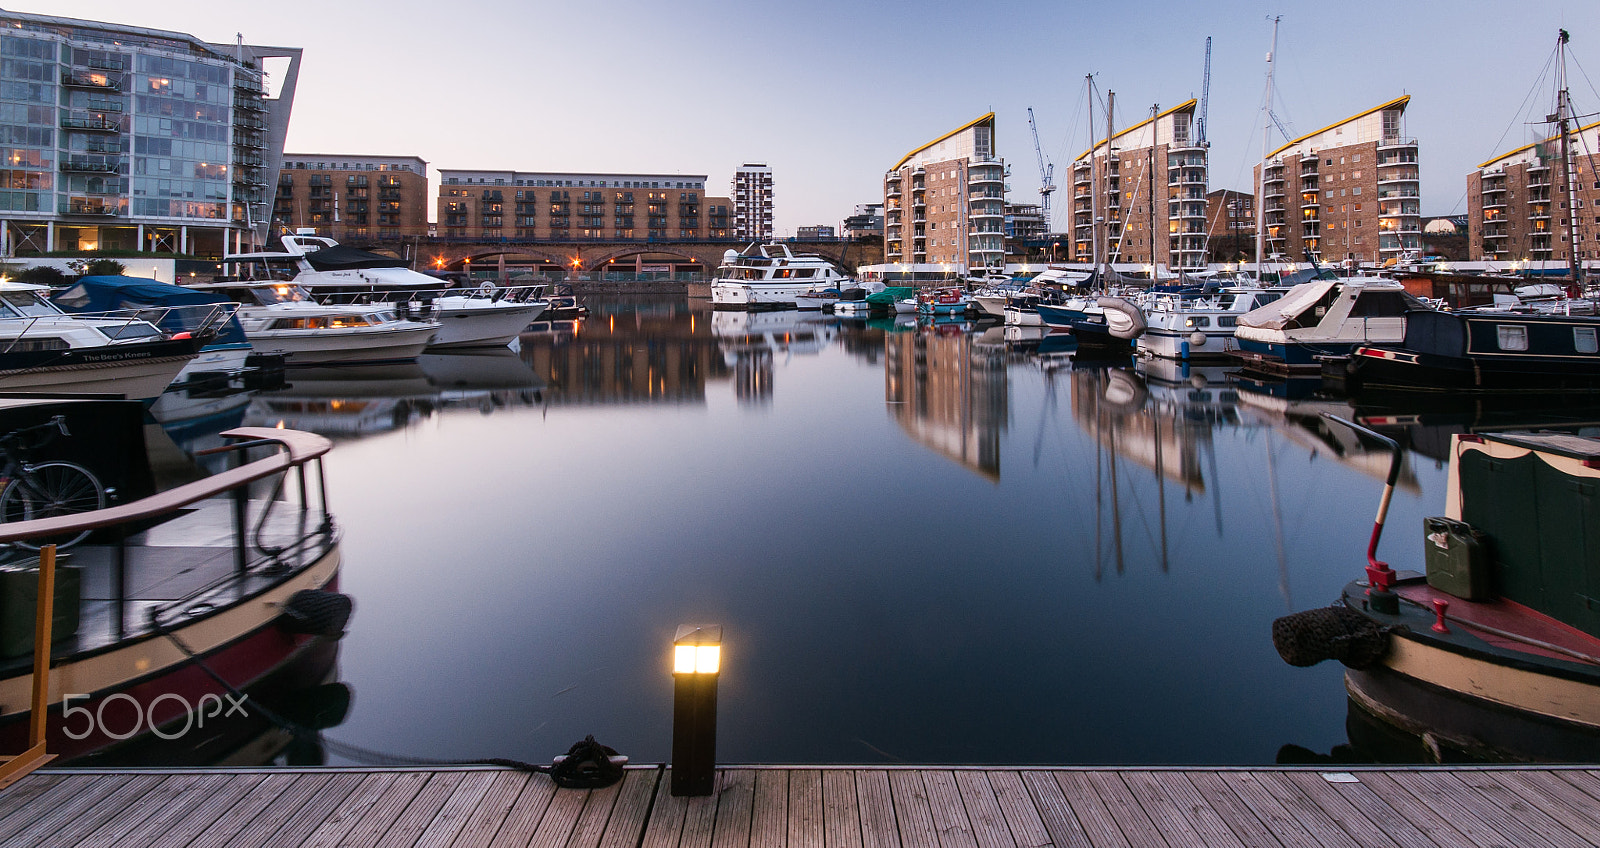 Nikon D90 sample photo. Limehouse basin in london's docklands photography